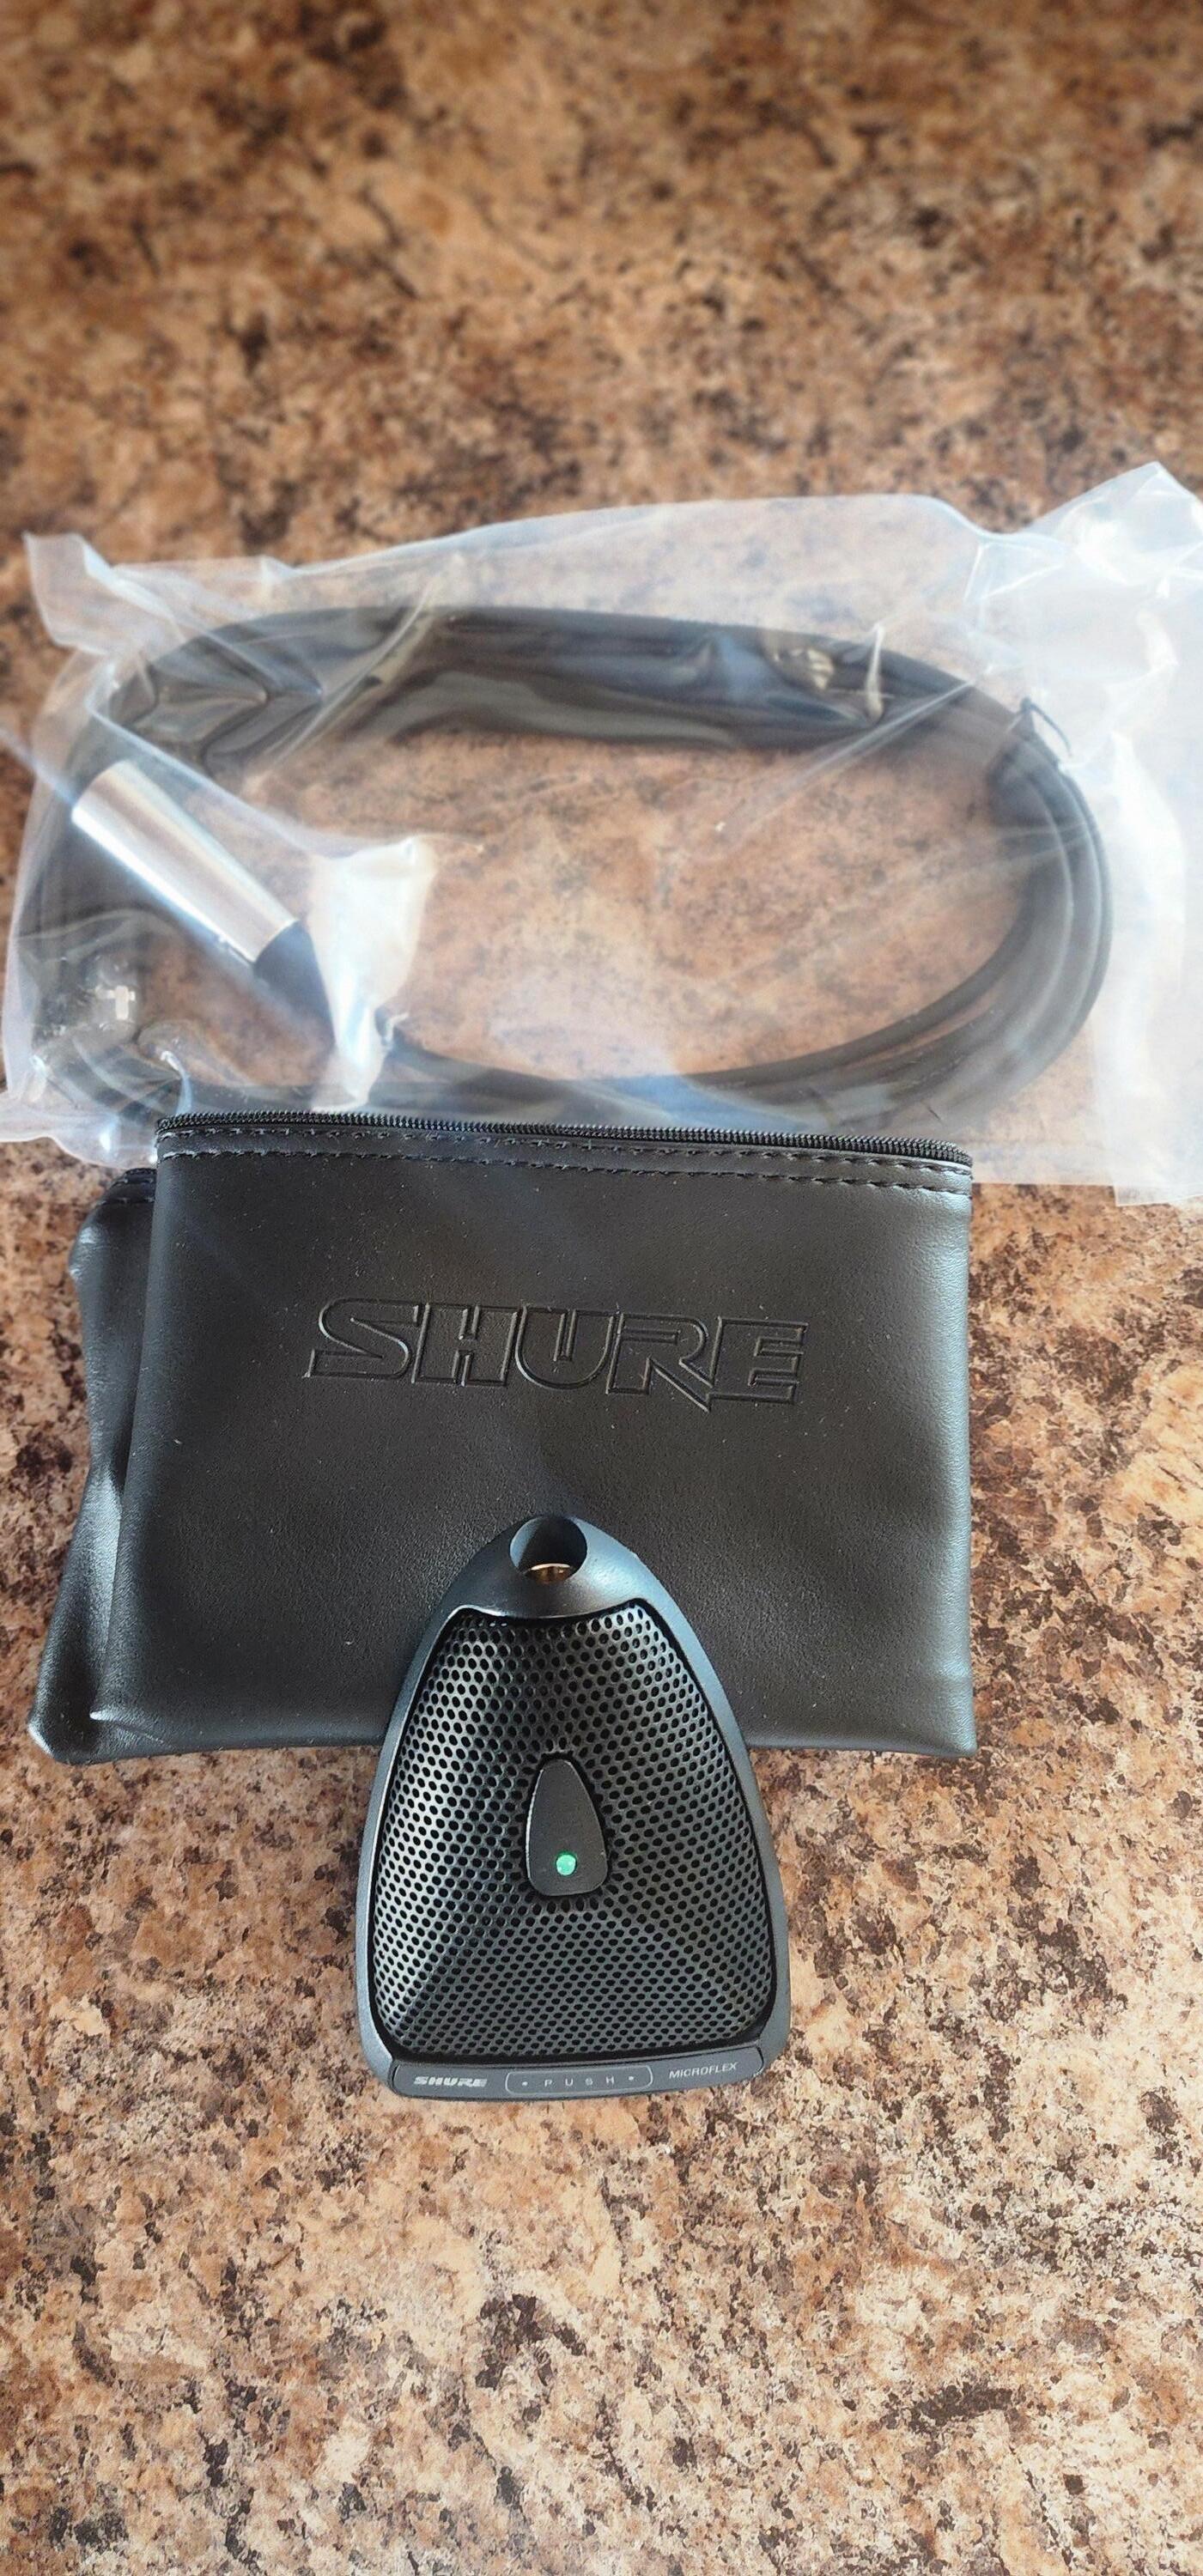 Used Shure New in box MX393/C Microflex - Sweetwater's Gear Exchange